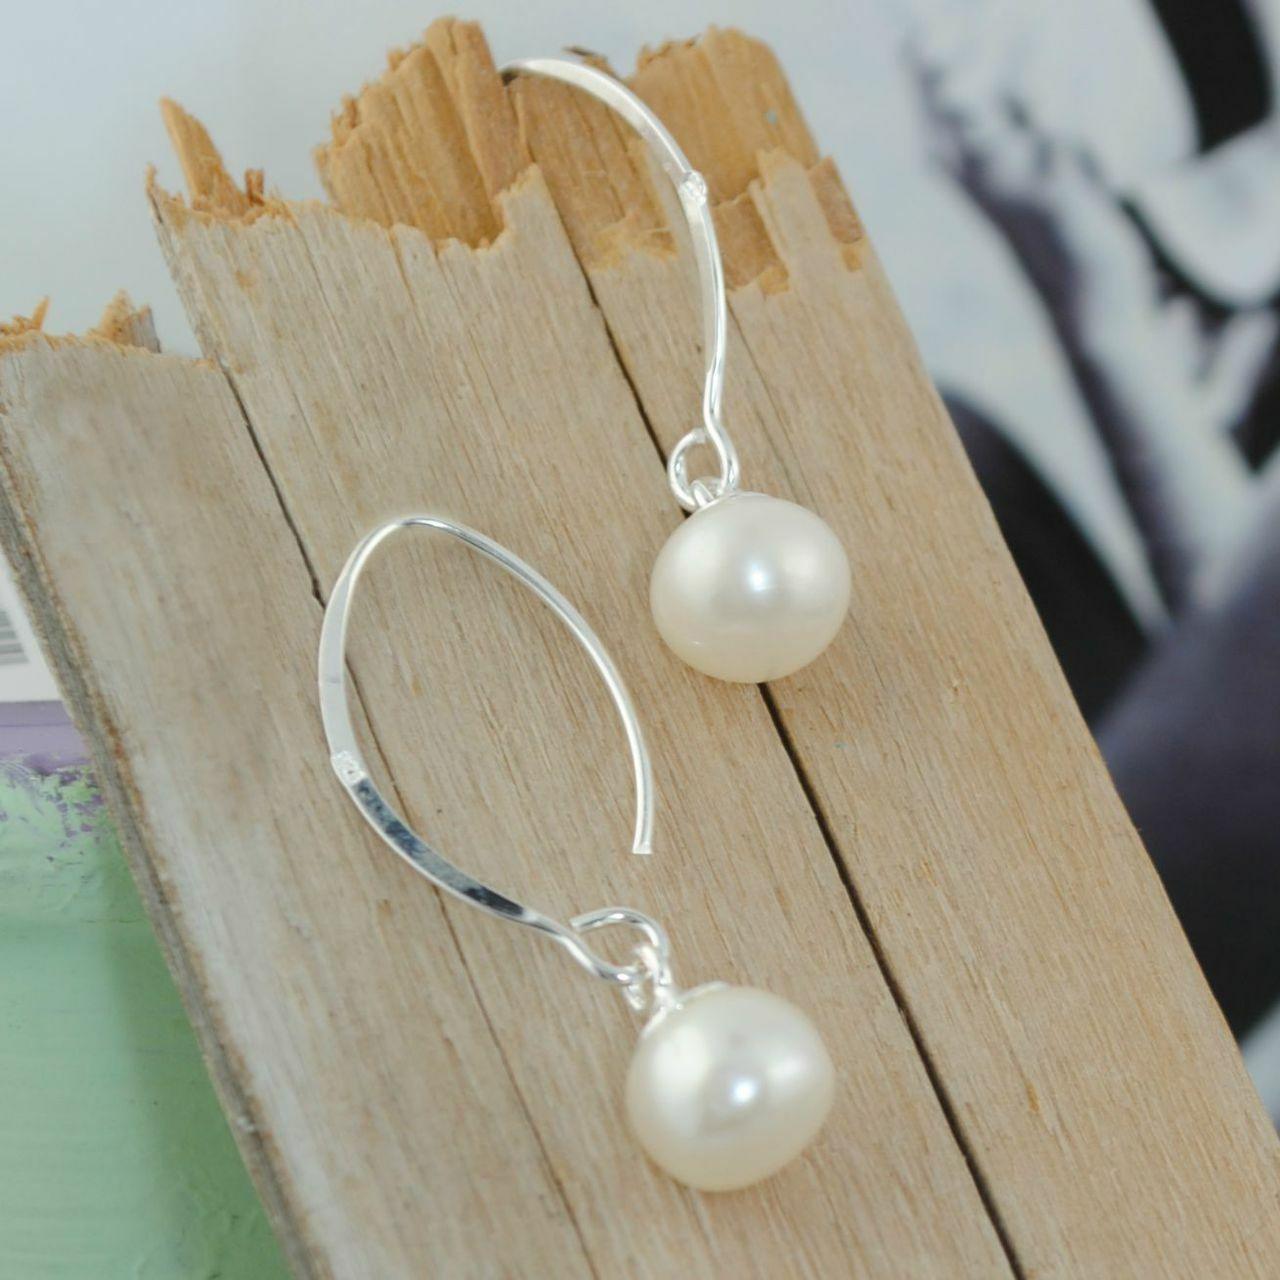 Handcrafted sterling silver and pearl earrings